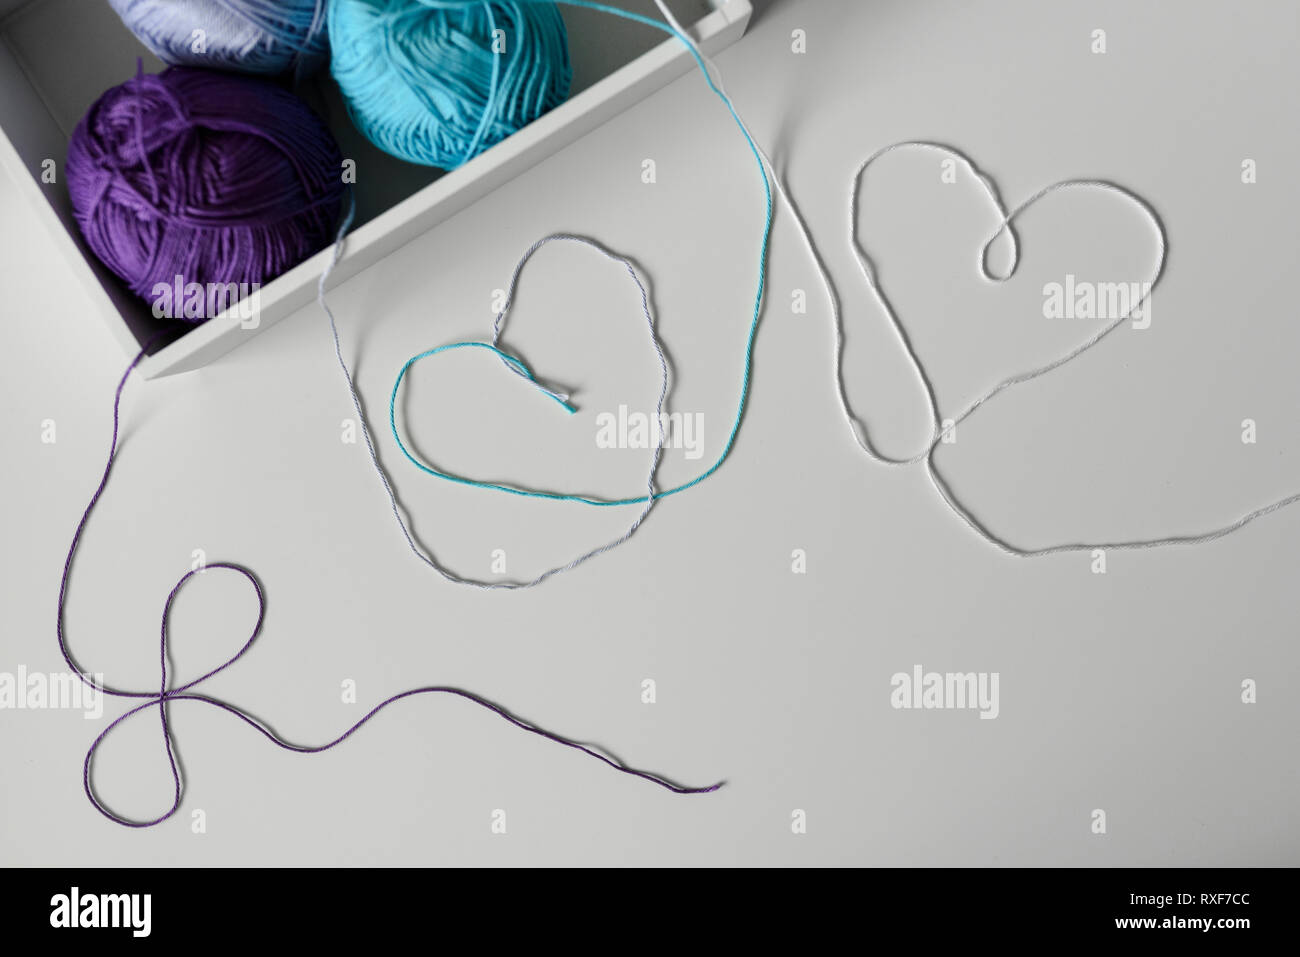 View from above on creative designed hearts from colorful wool strands coming out of the white box with knitting yarn balls. Stock Photo